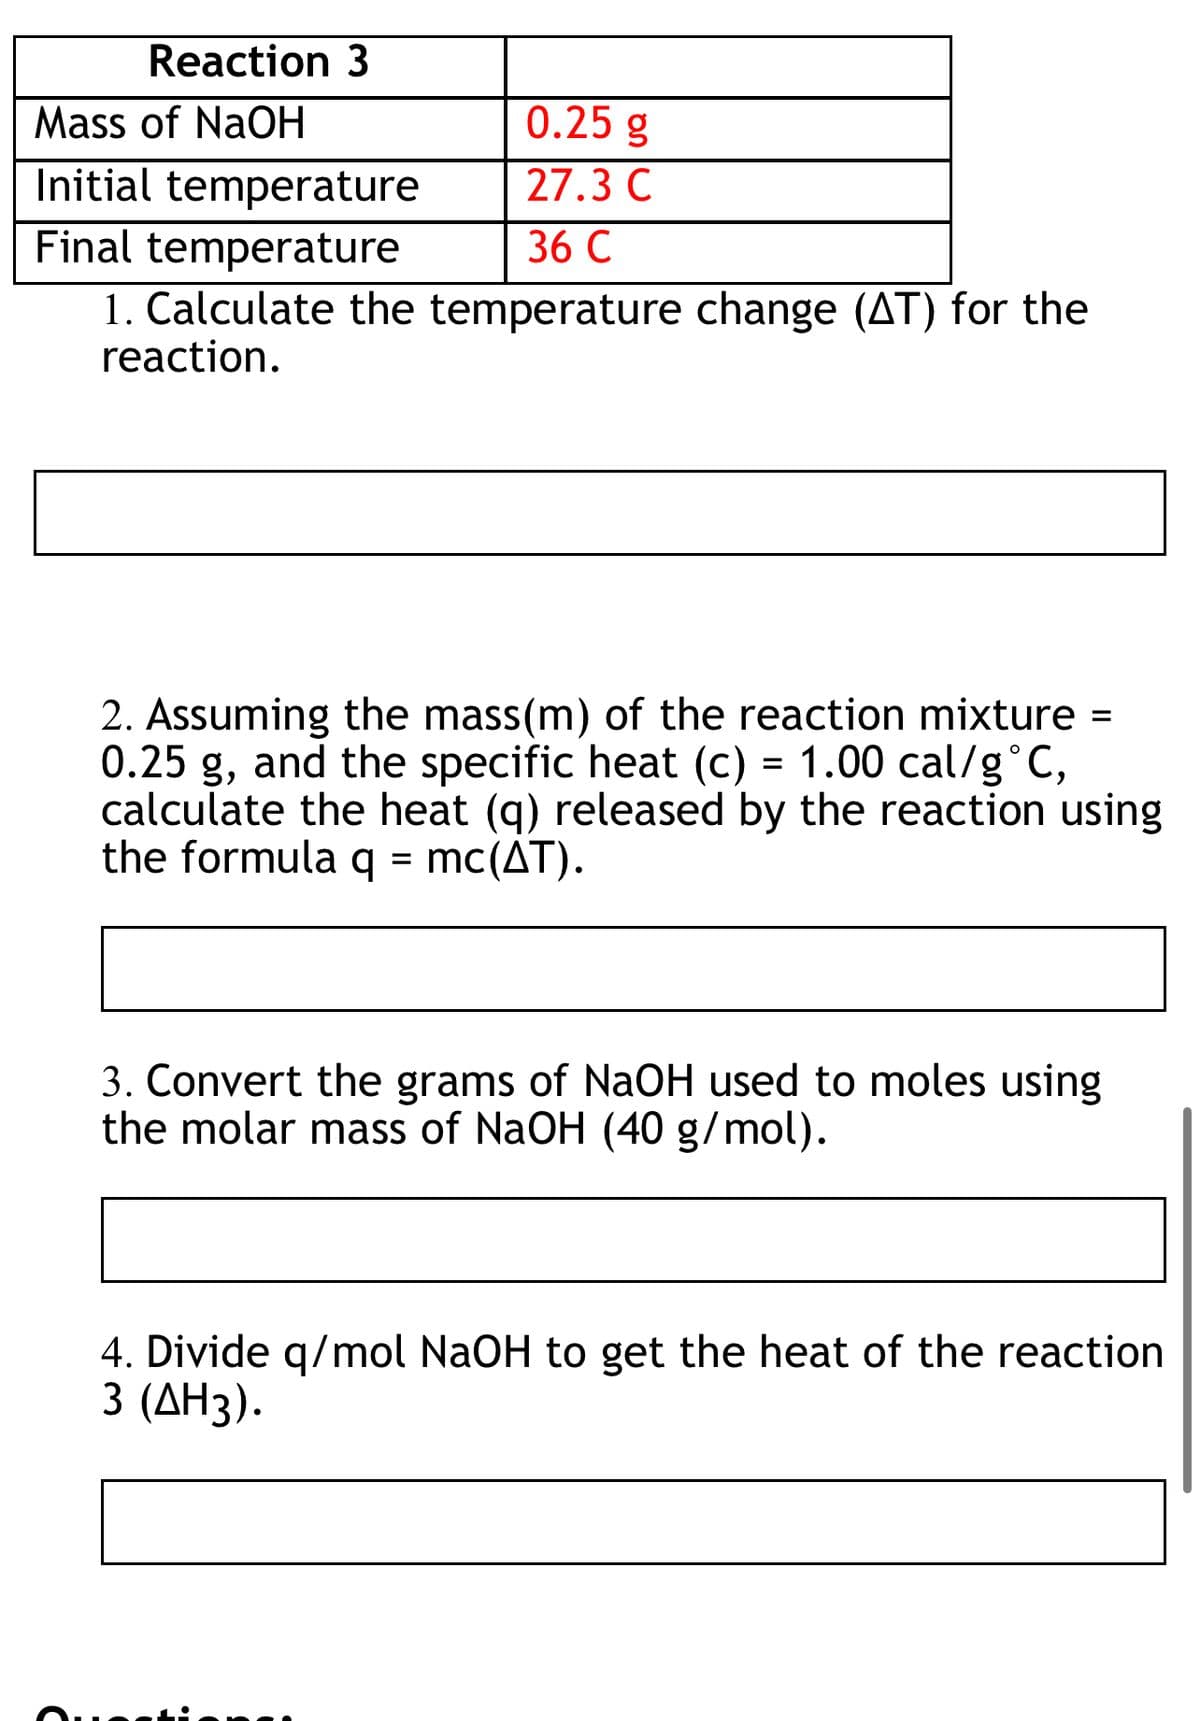 Reaction 3
0.25 g
27.3 C
Mass of NaOH
Initial temperature
Final temperature
36 C
1. Calculate the temperature change (AT) for the
reaction.
2. Assuming the mass (m) of the reaction mixture =
0.25 g, and the specific heat (c) = 1.00 cal/g °C,
calculate the heat (q) released by the reaction using
the formula q = mc(AT).
3. Convert the grams of NaOH used to moles using
the molar mass of NaOH (40 g/mol).
4. Divide q/mol NaOH to get the heat of the reaction
3 (ΔΗ3).